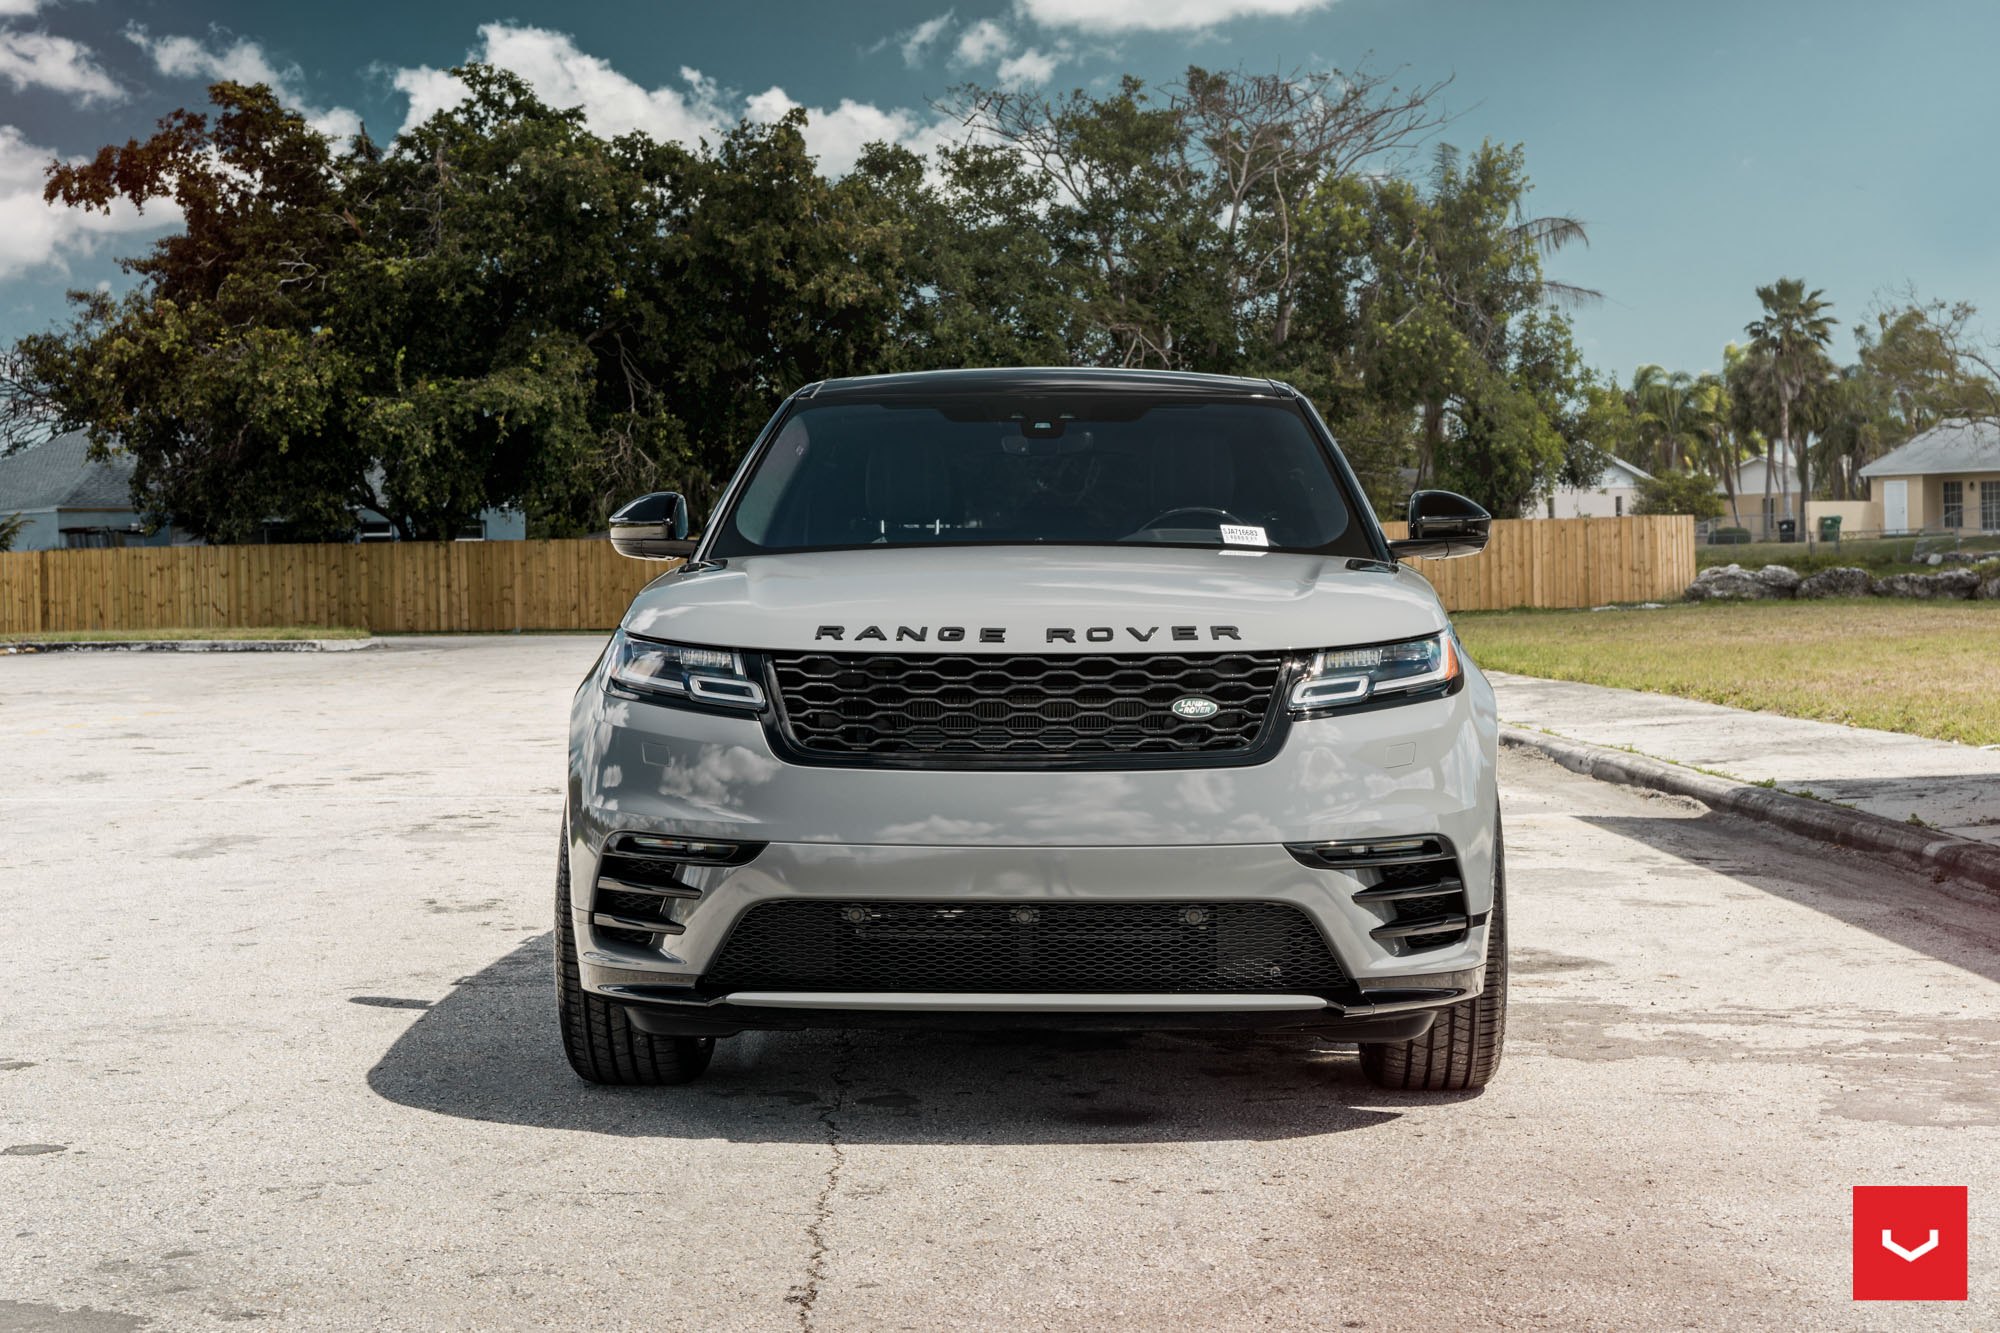 Blacked Out Mesh Grille on Gray Range Rover Velar - Photo by Vossen